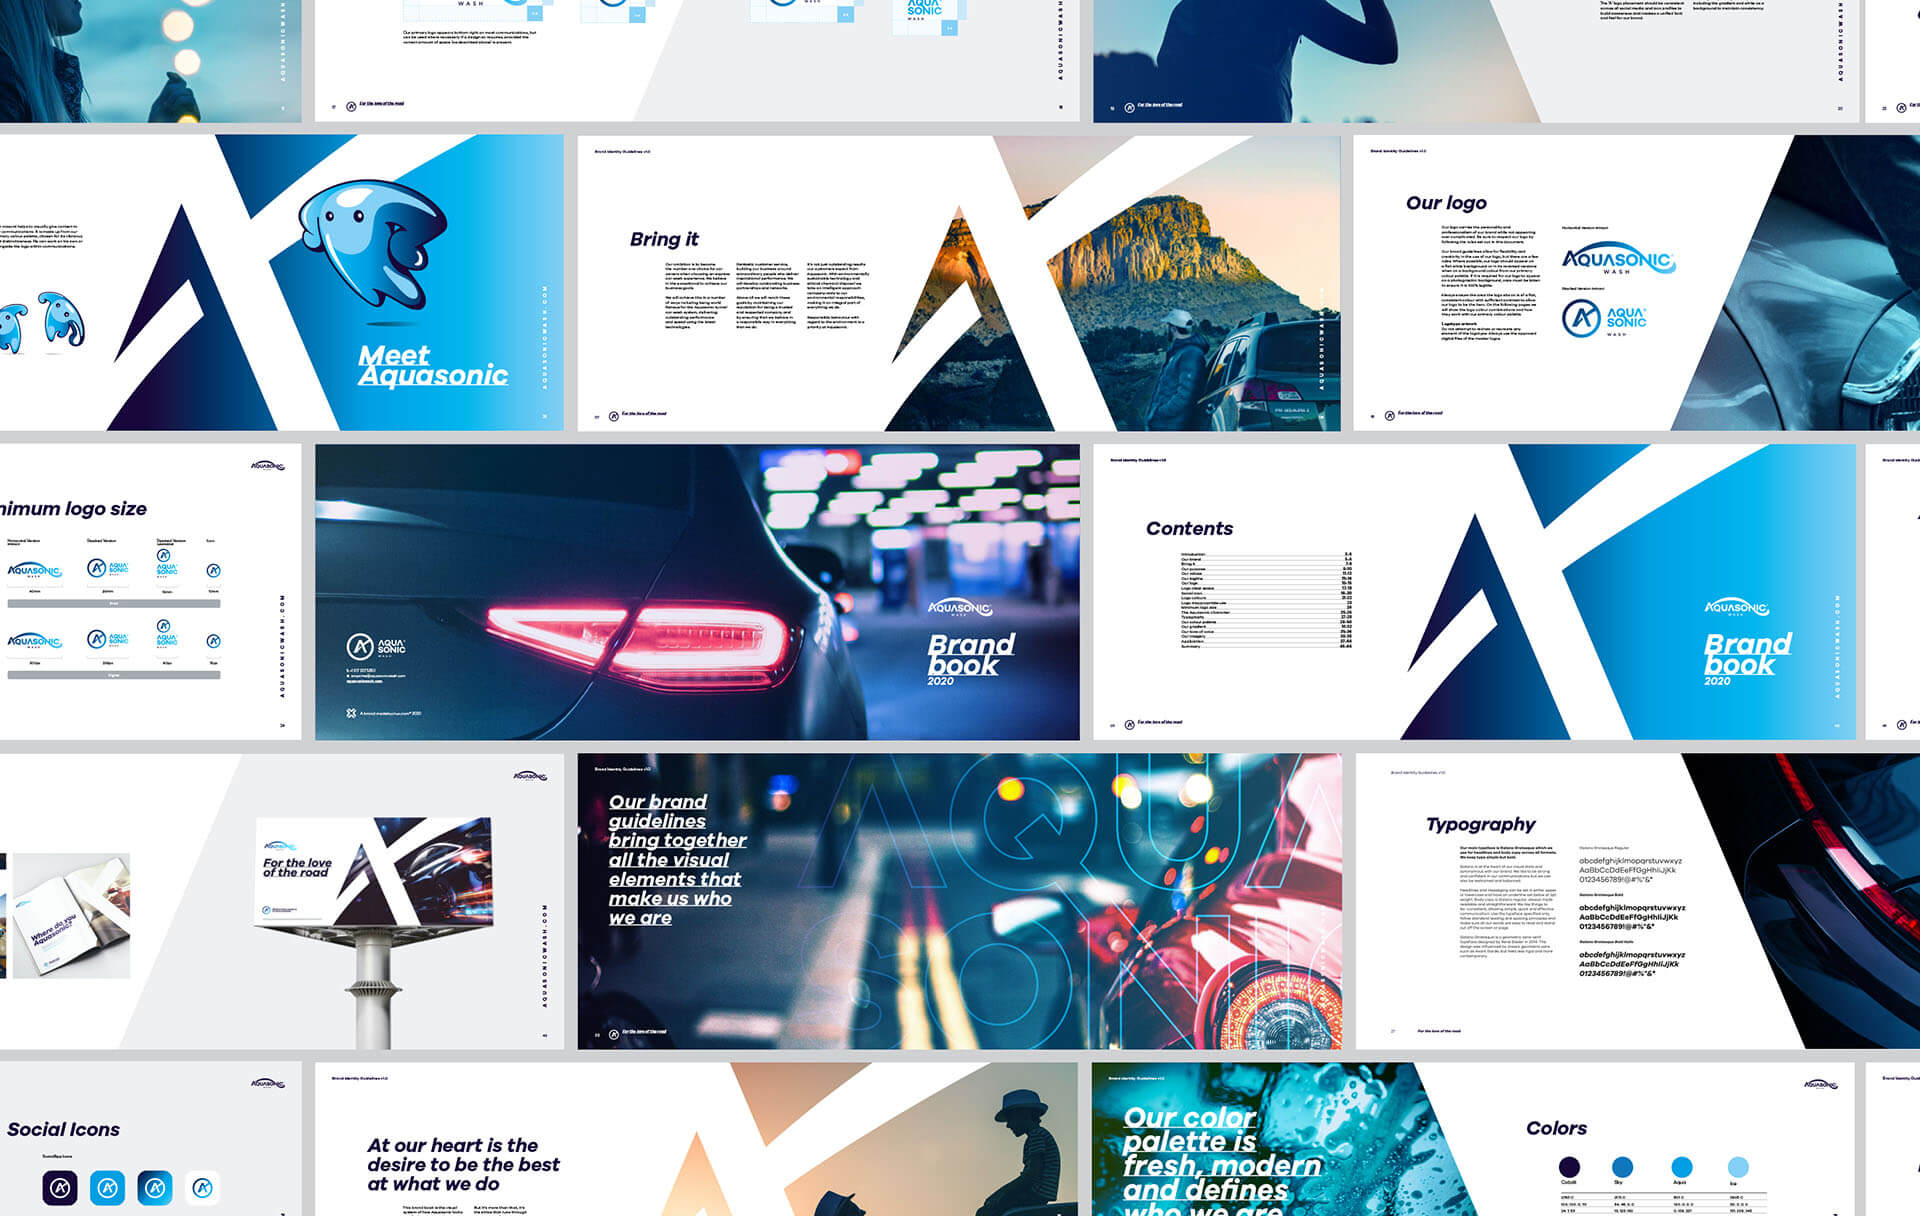 Aquasonic brand guidelines created by the digital design agency - Crux - Hampshire